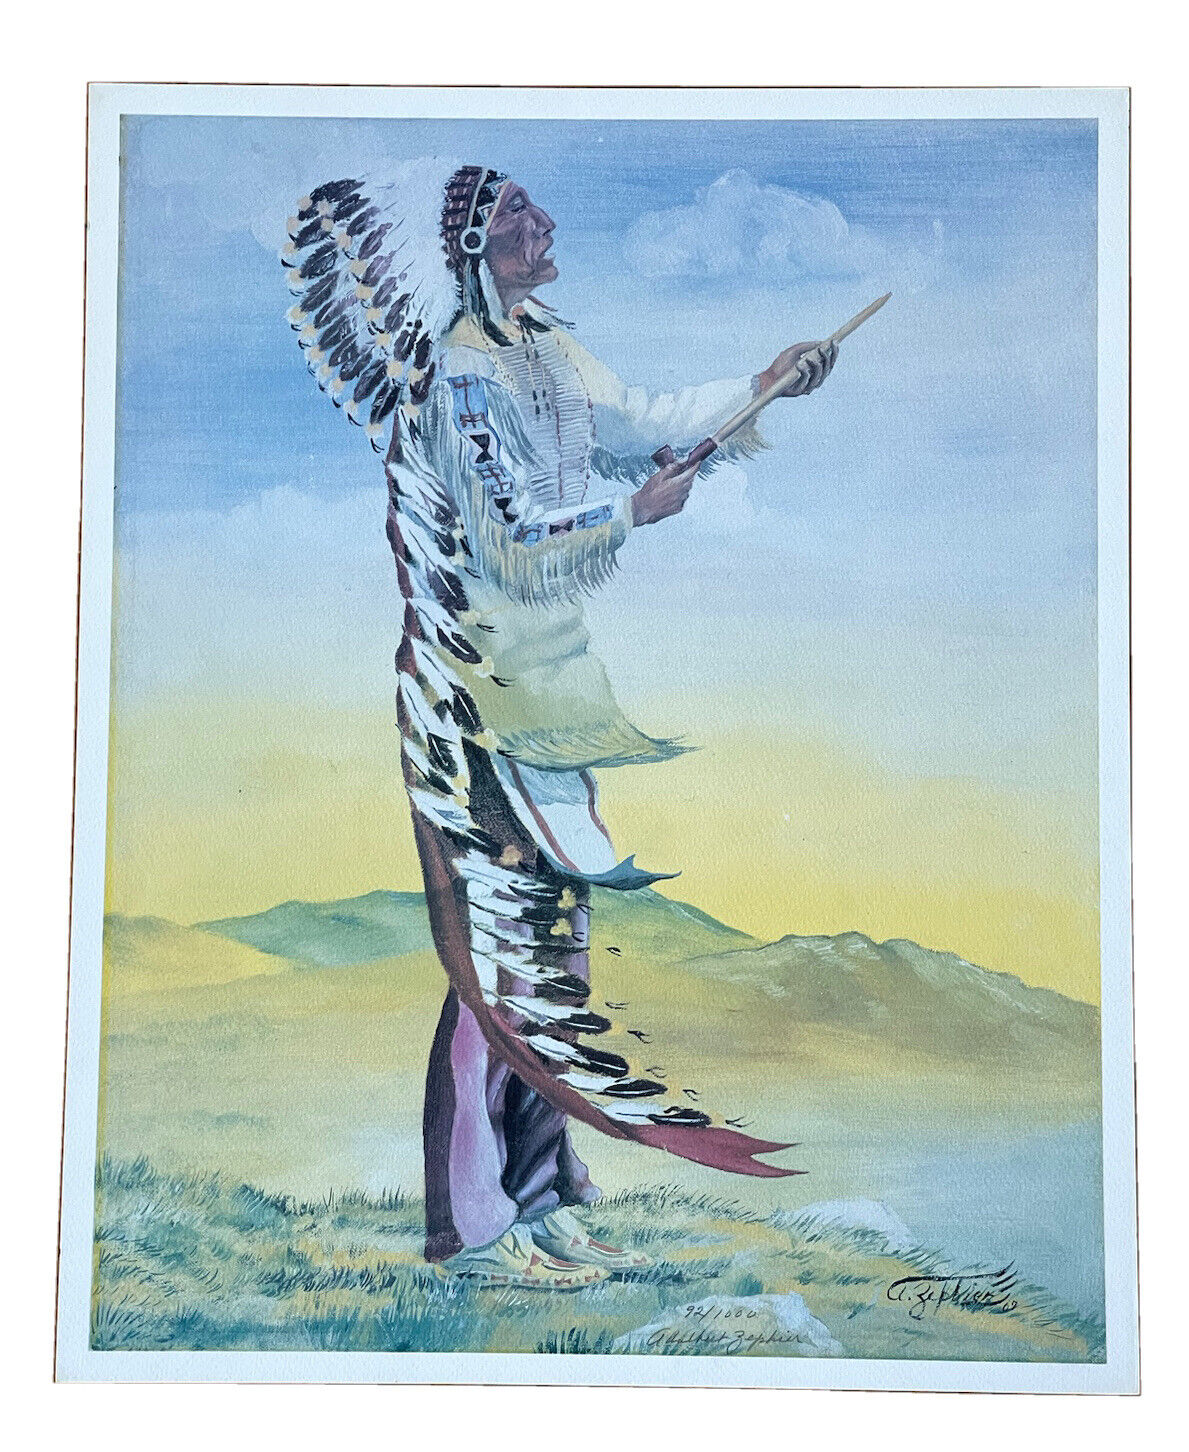 Native American Art Print By ADELBERT ZEPHIER 92/1000 SIGNED 21x17” Sioux Chief